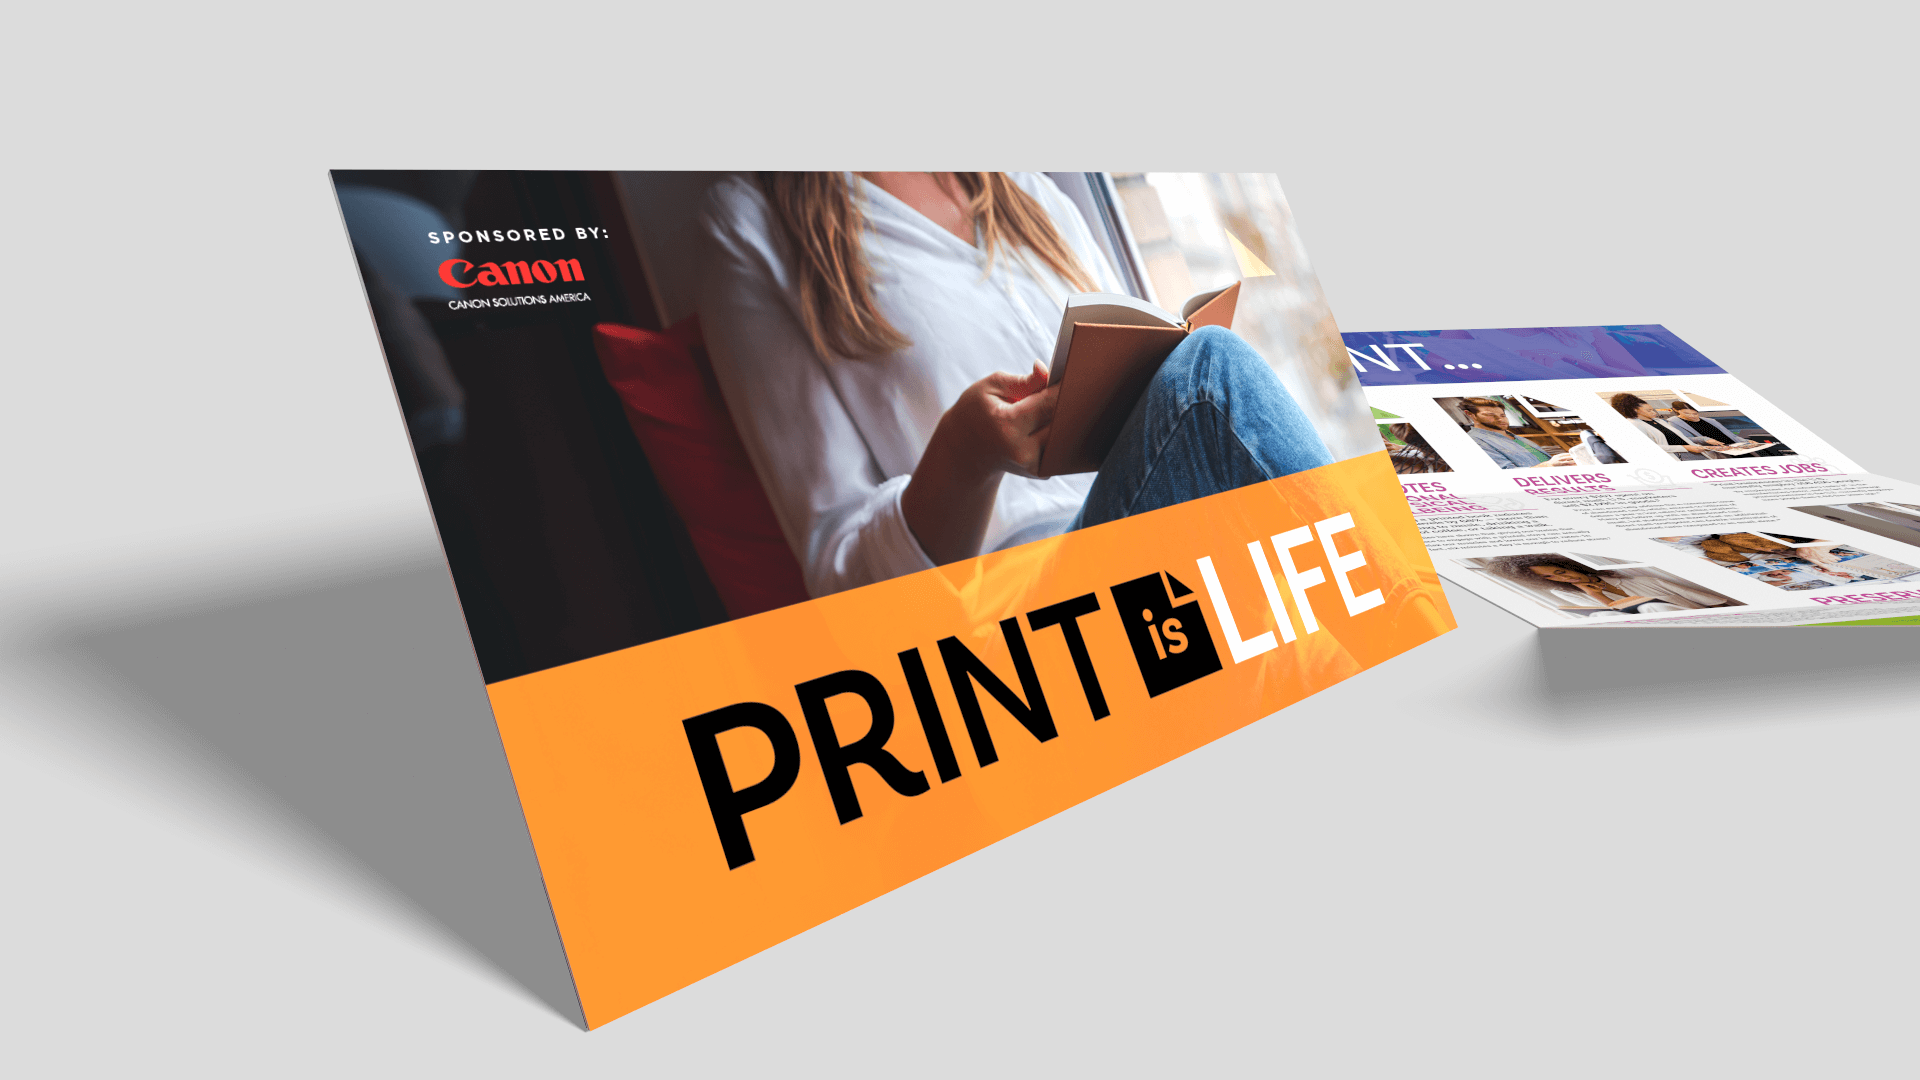 Project Spotlight: The Power of Print